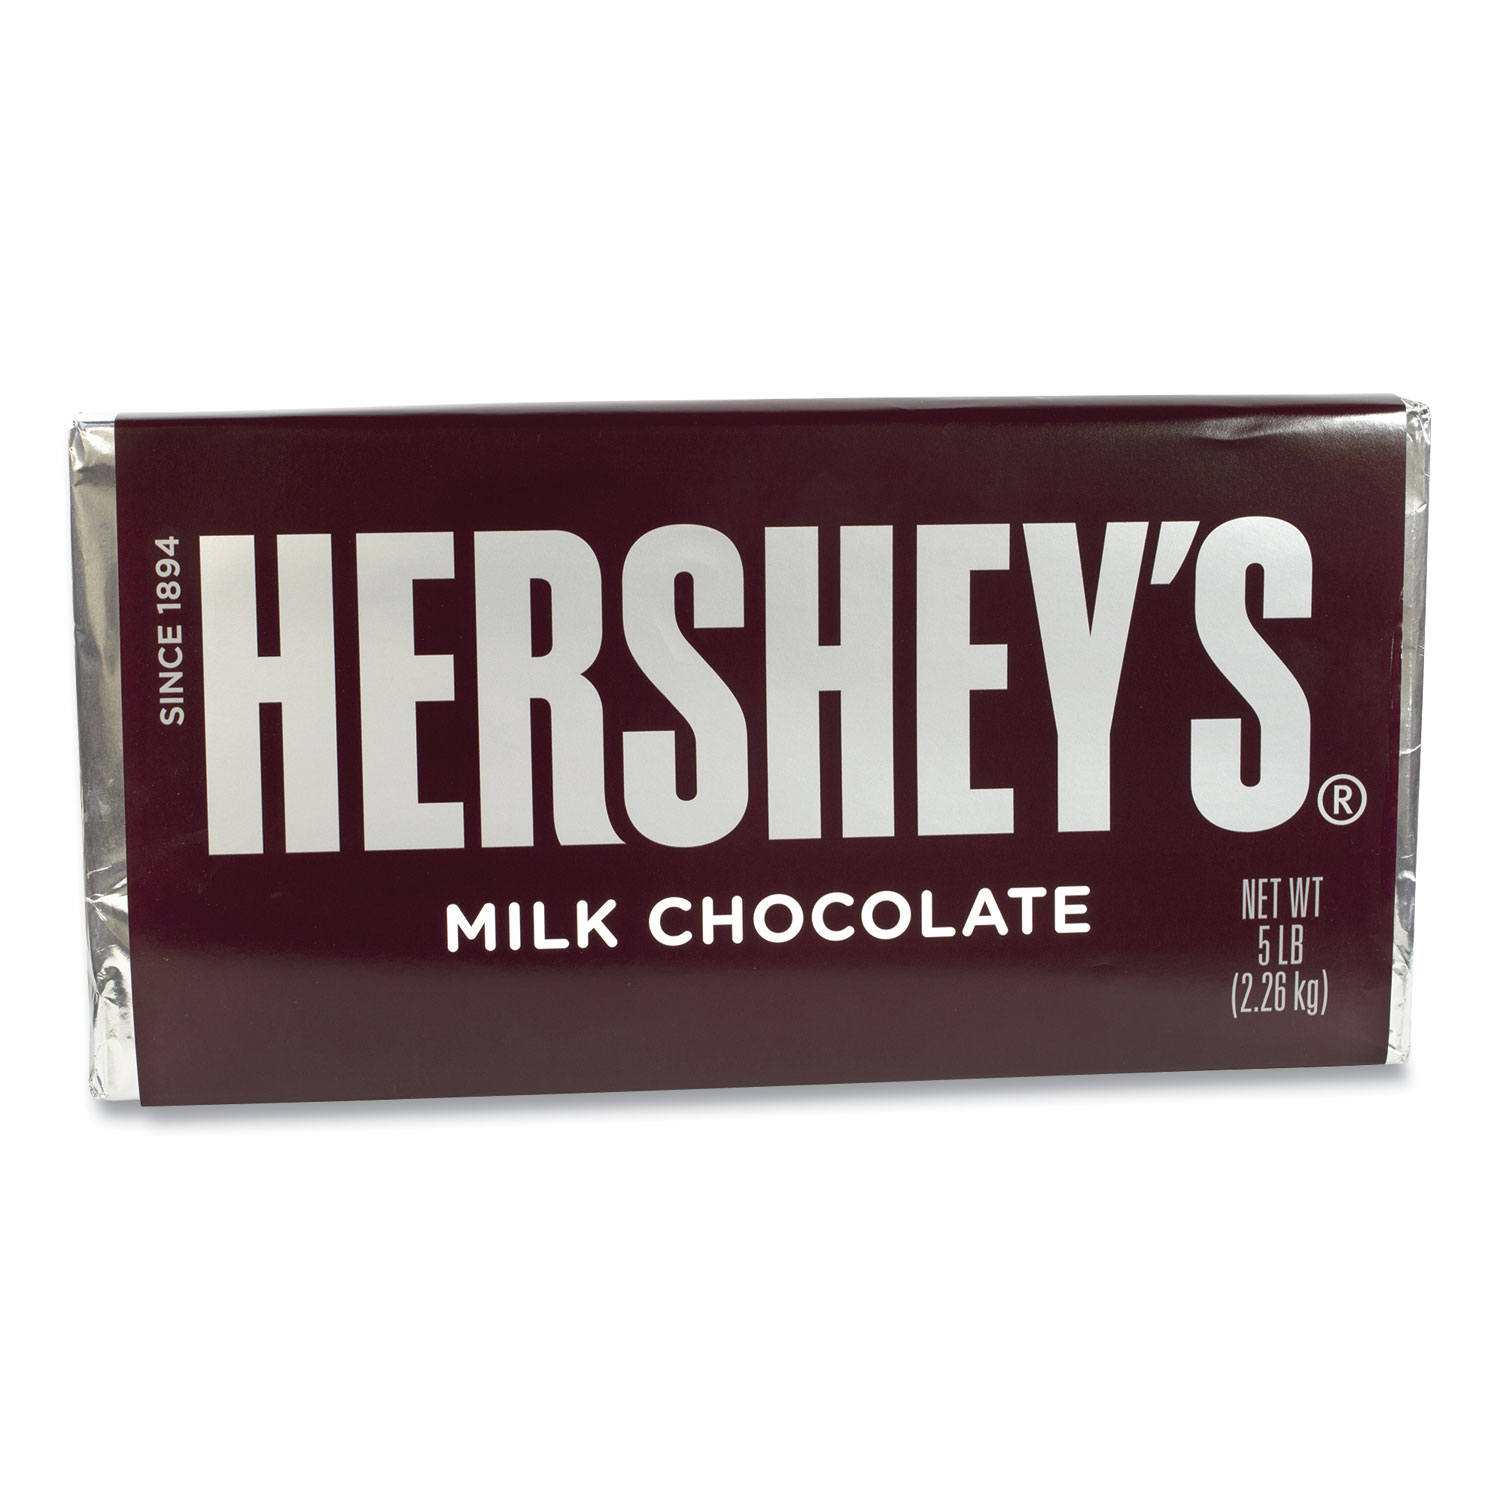  Hershey's 63001 Milk Chocolate Bar, 5 lb Bar, Free Delivery in 1-4 Business Days (GRR24600015) 